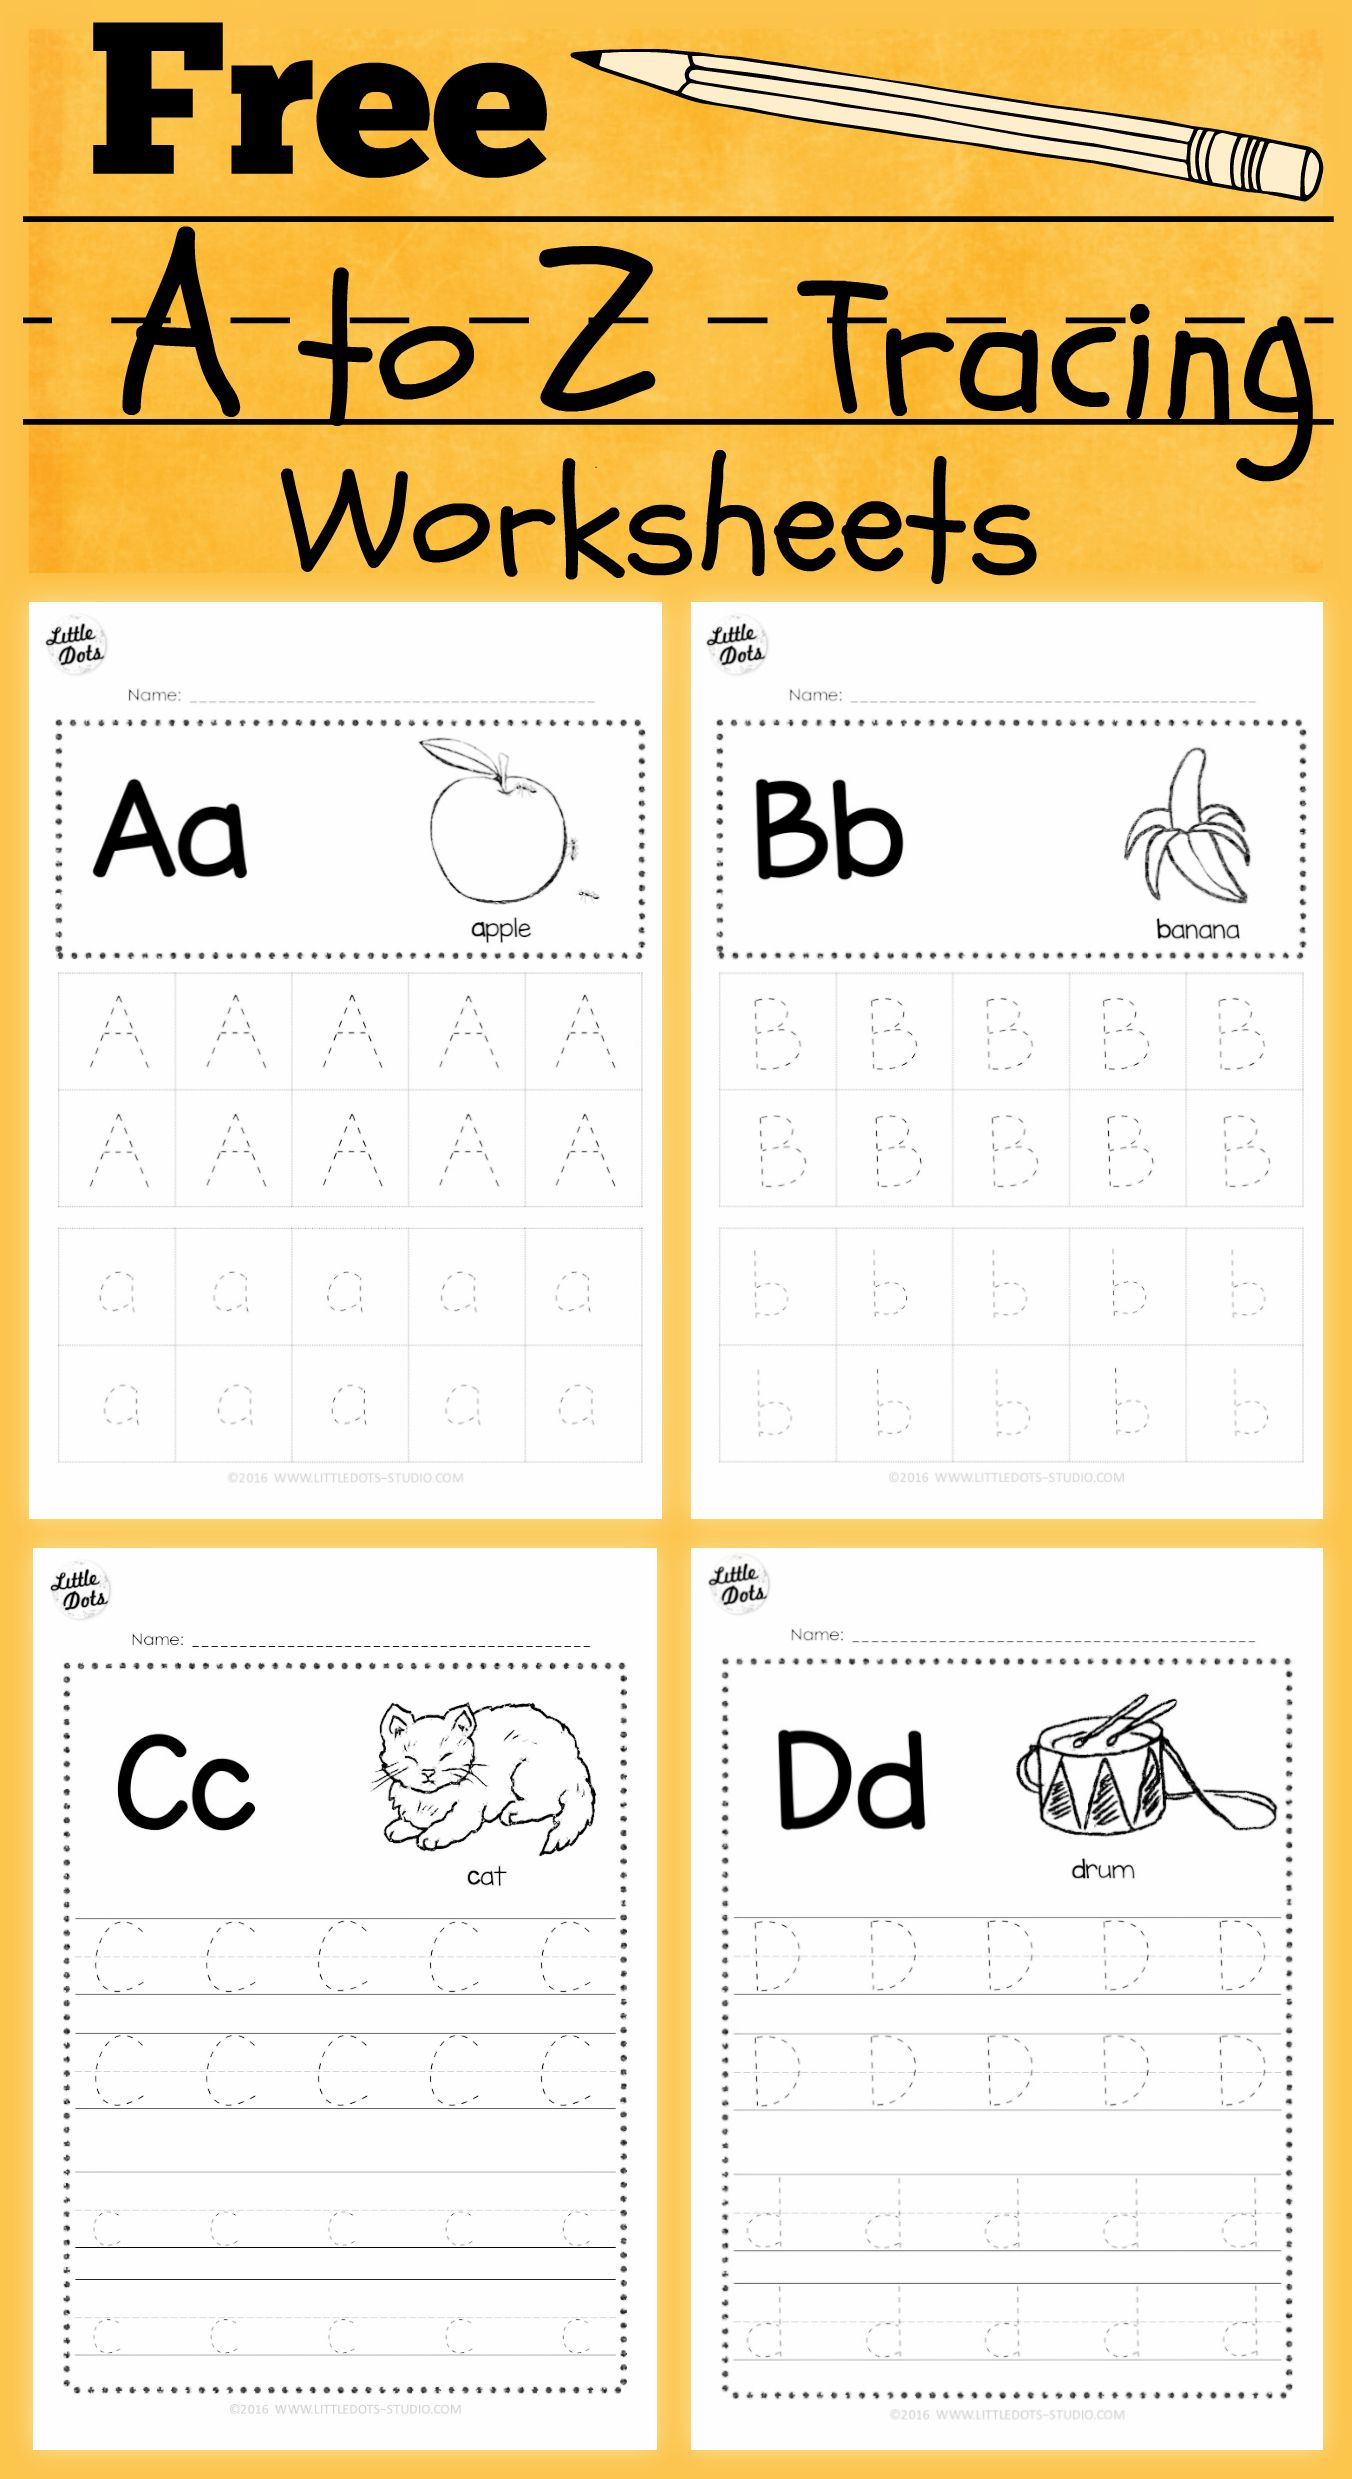 Download Free Alphabet Tracing Worksheets For Letter A To Z intended for Alphabet Worksheets A-Z Pdf